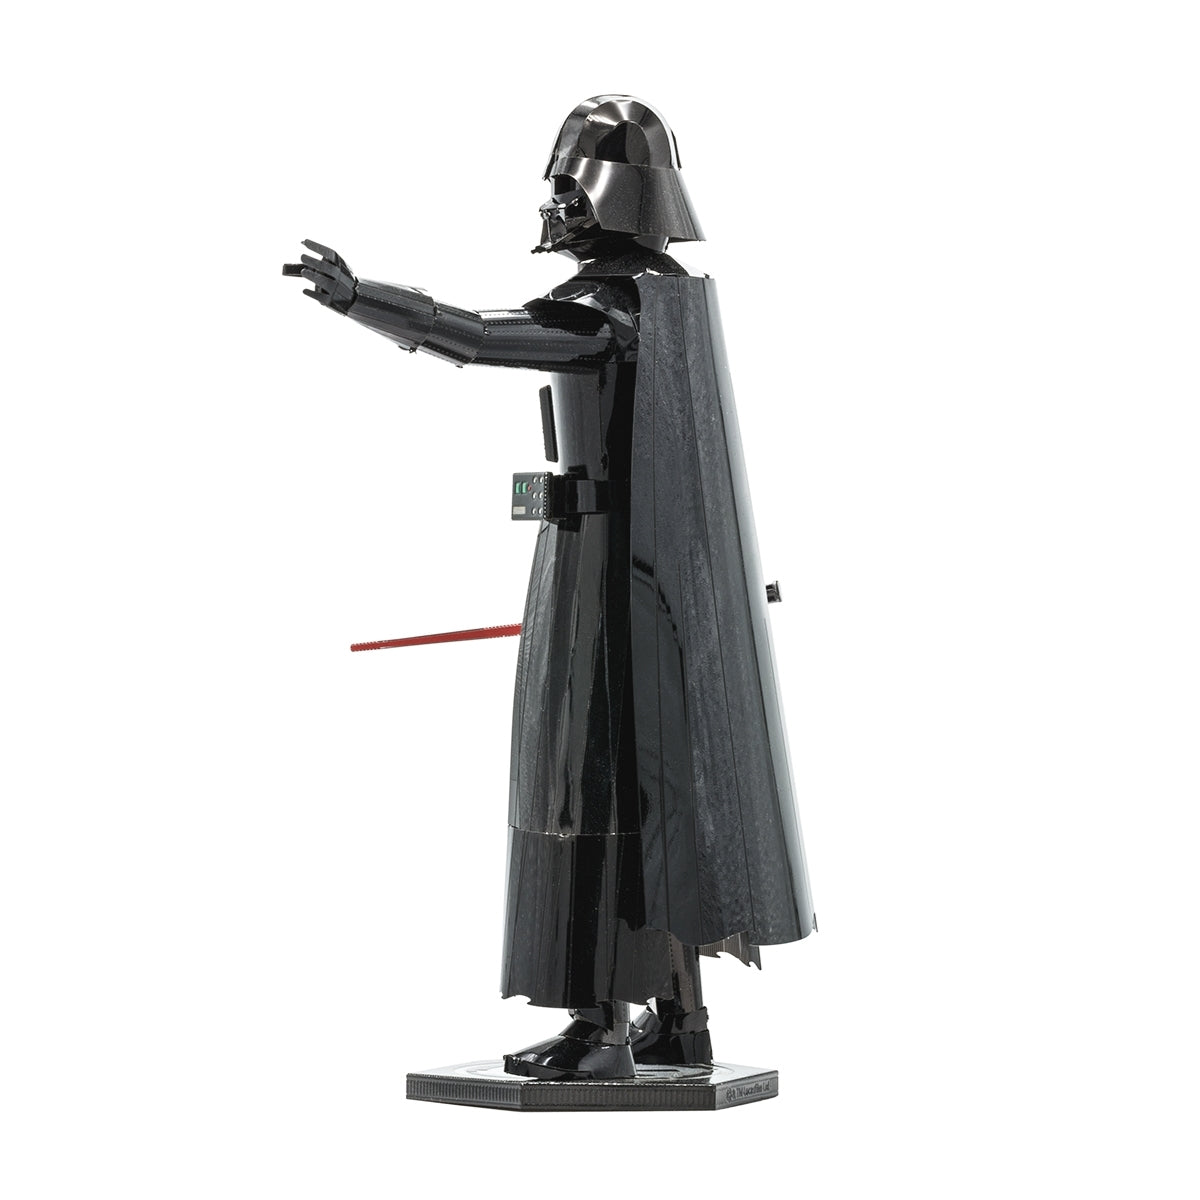 DARTH VADER - Steel 3D Model Kit gift puzzle puzzle